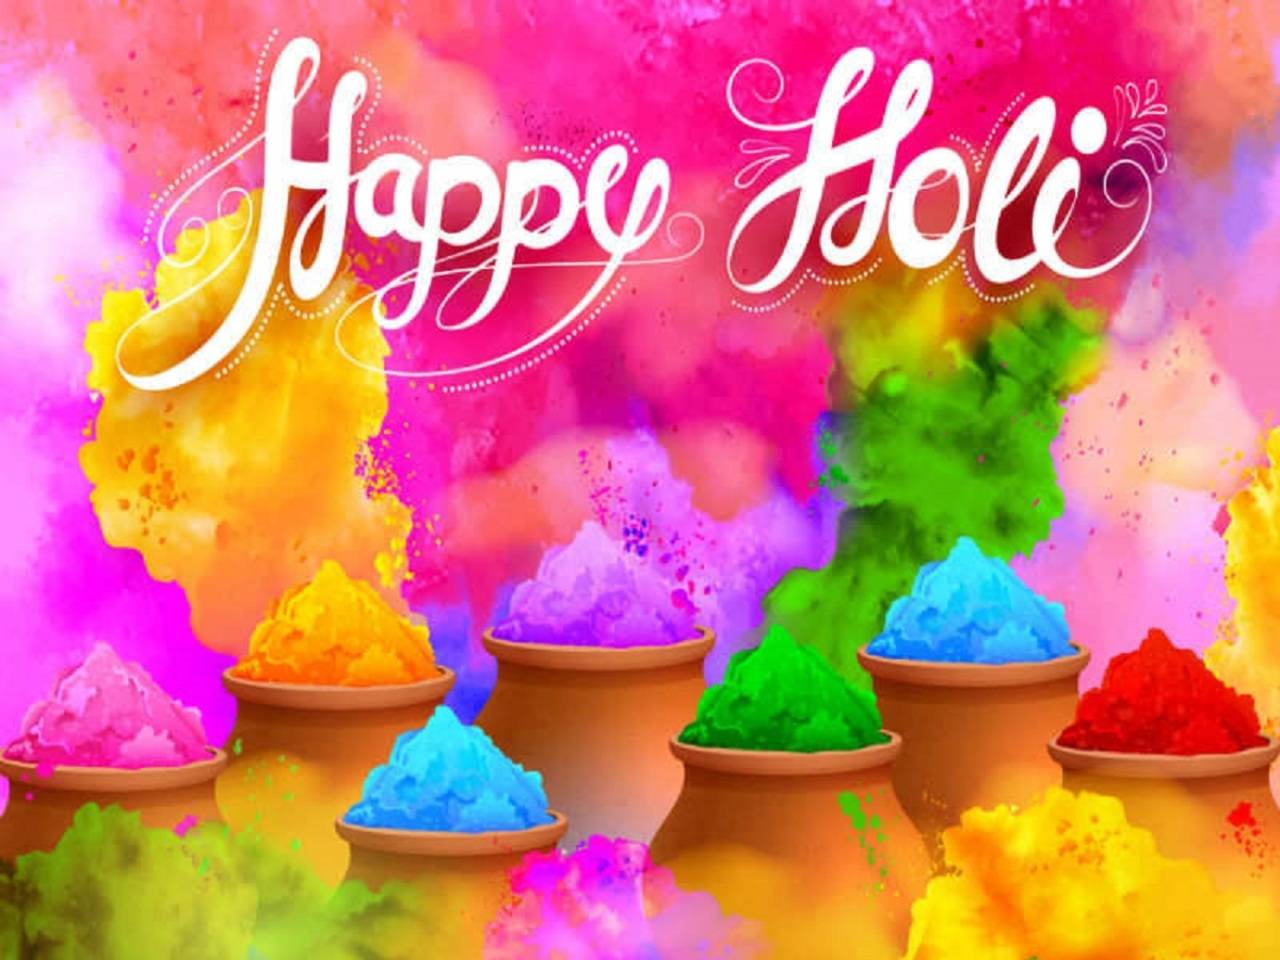 Astonishing Collection of 4K Happy Holi Images 2020 – Over 999+ Spectacular Pictures